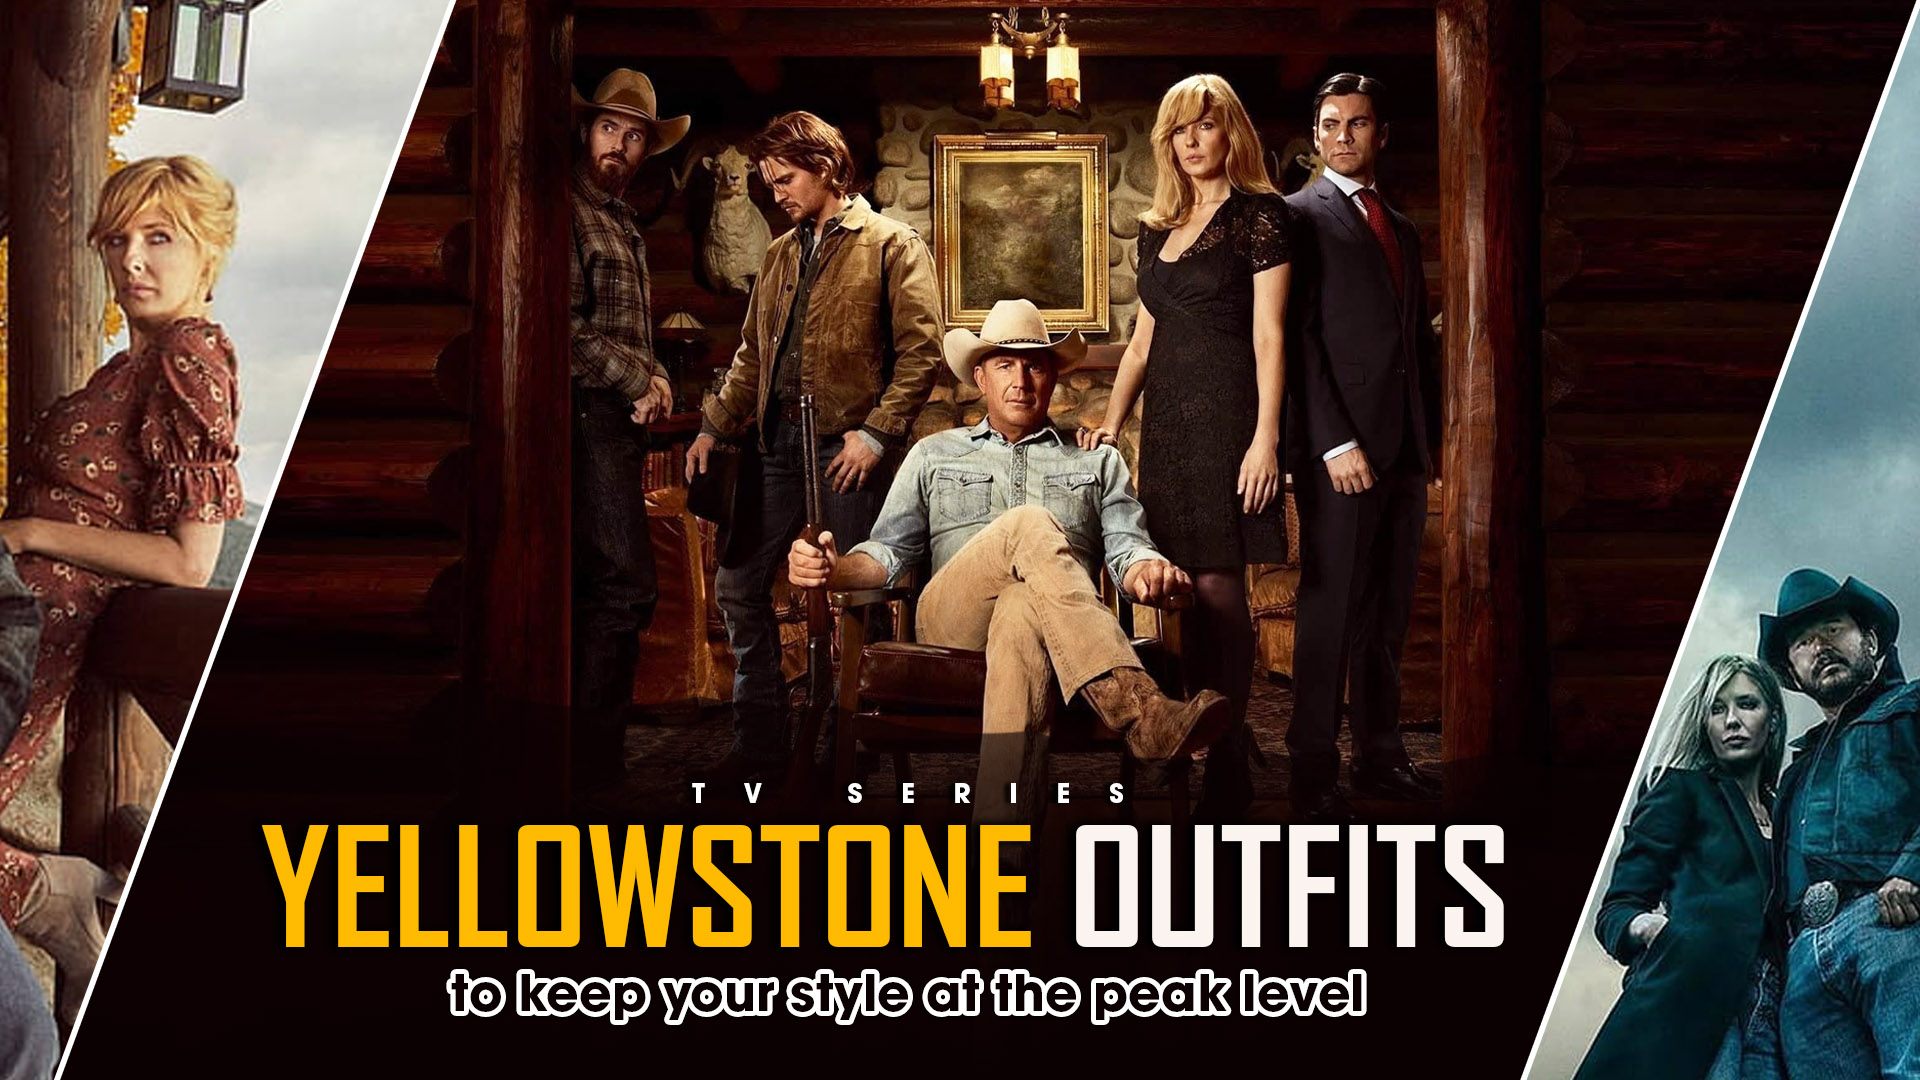 TV series Yellowstone Outfits to keep your style at the peak level